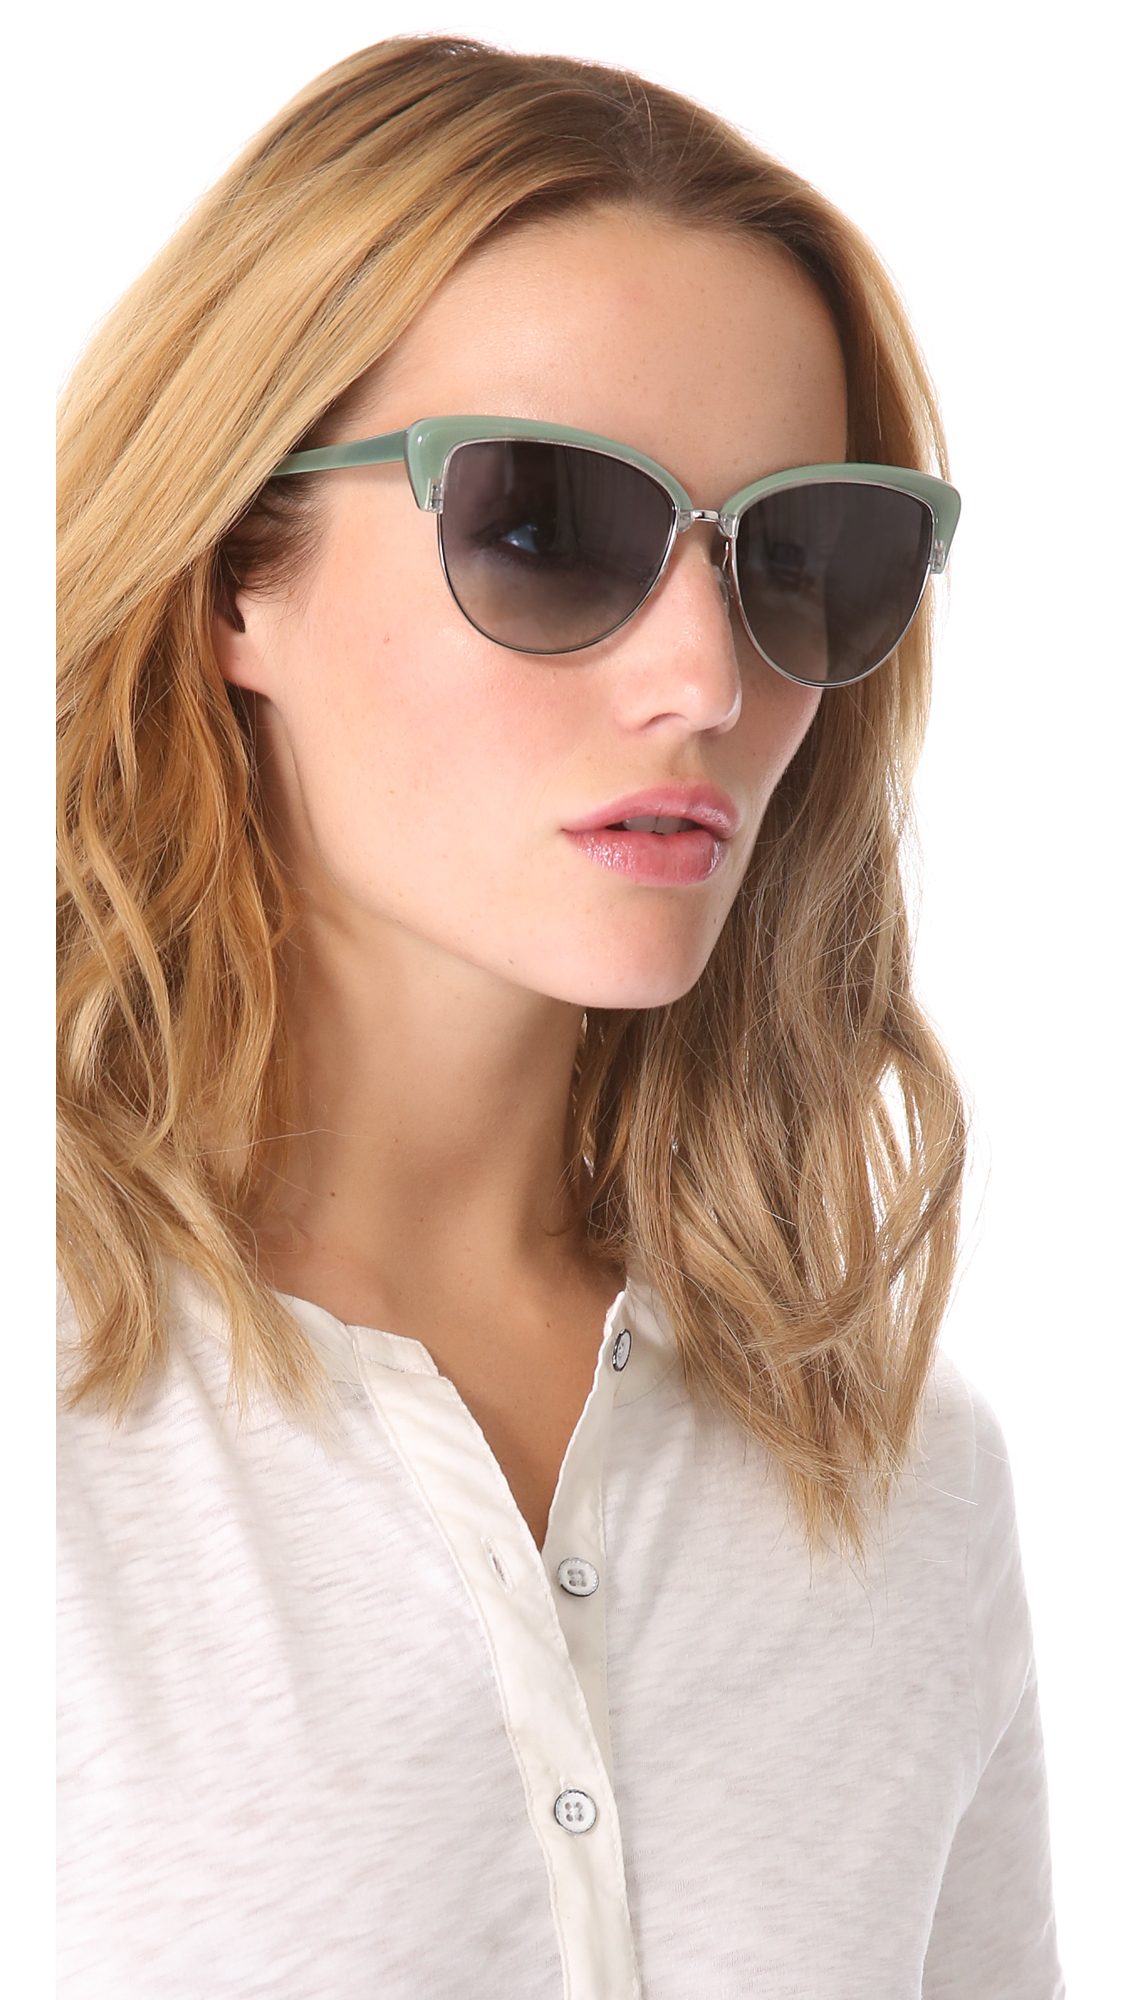 Lyst - Oliver Peoples Alisha Sunglasses in Blue